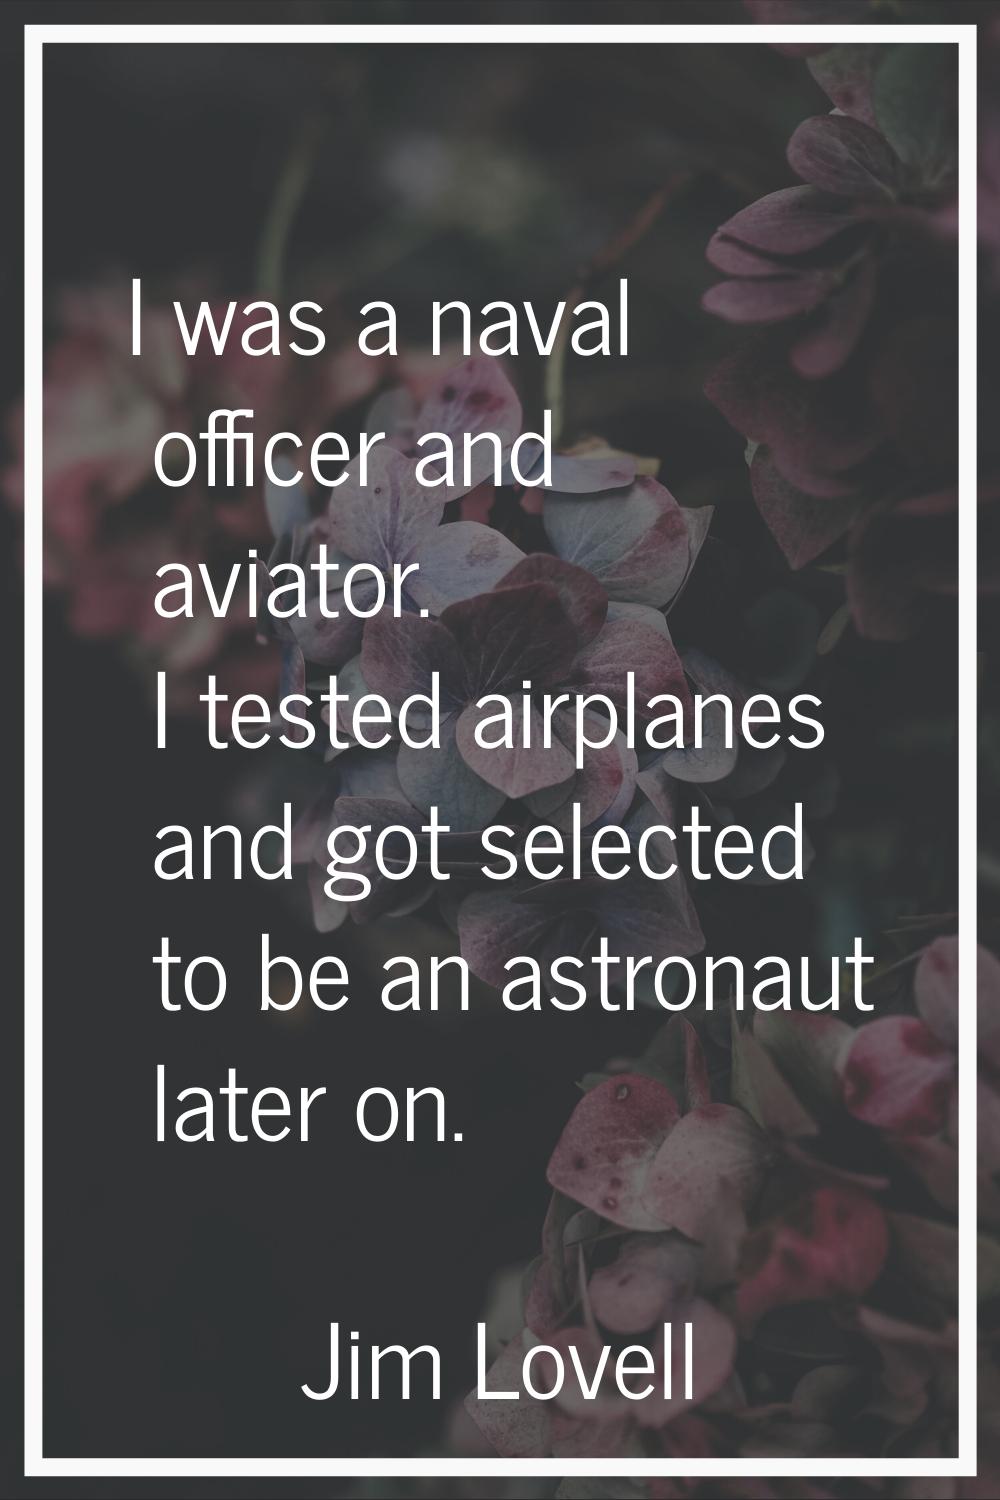 I was a naval officer and aviator. I tested airplanes and got selected to be an astronaut later on.